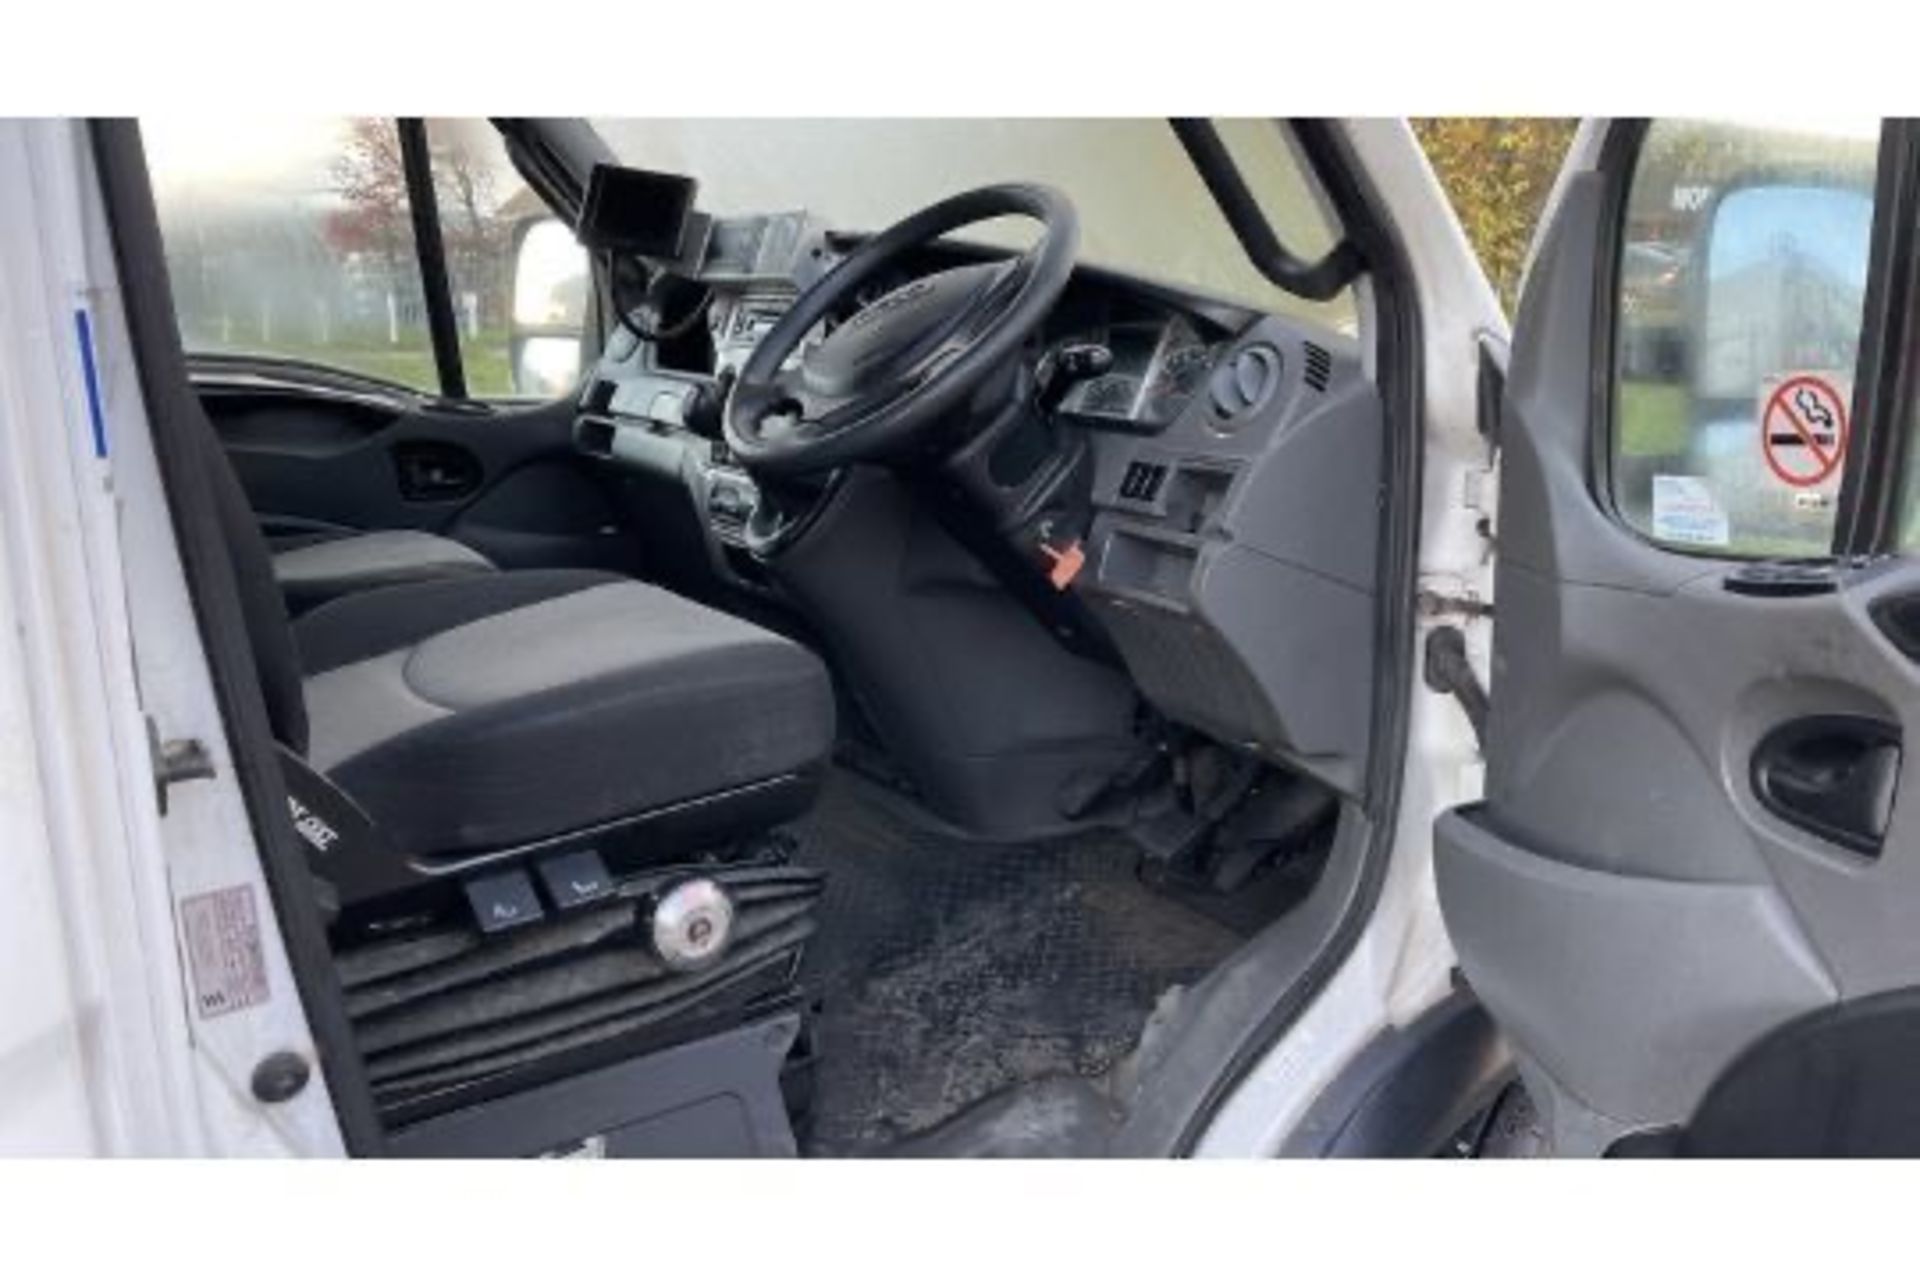 BX11 TCZ. 2011 IVECO DAILY 70C17. BOX VAN. 4X2. DIESEL MANUAL GEARBOX. REAR VIEW CAMERA 6 X SPEED - Image 11 of 24